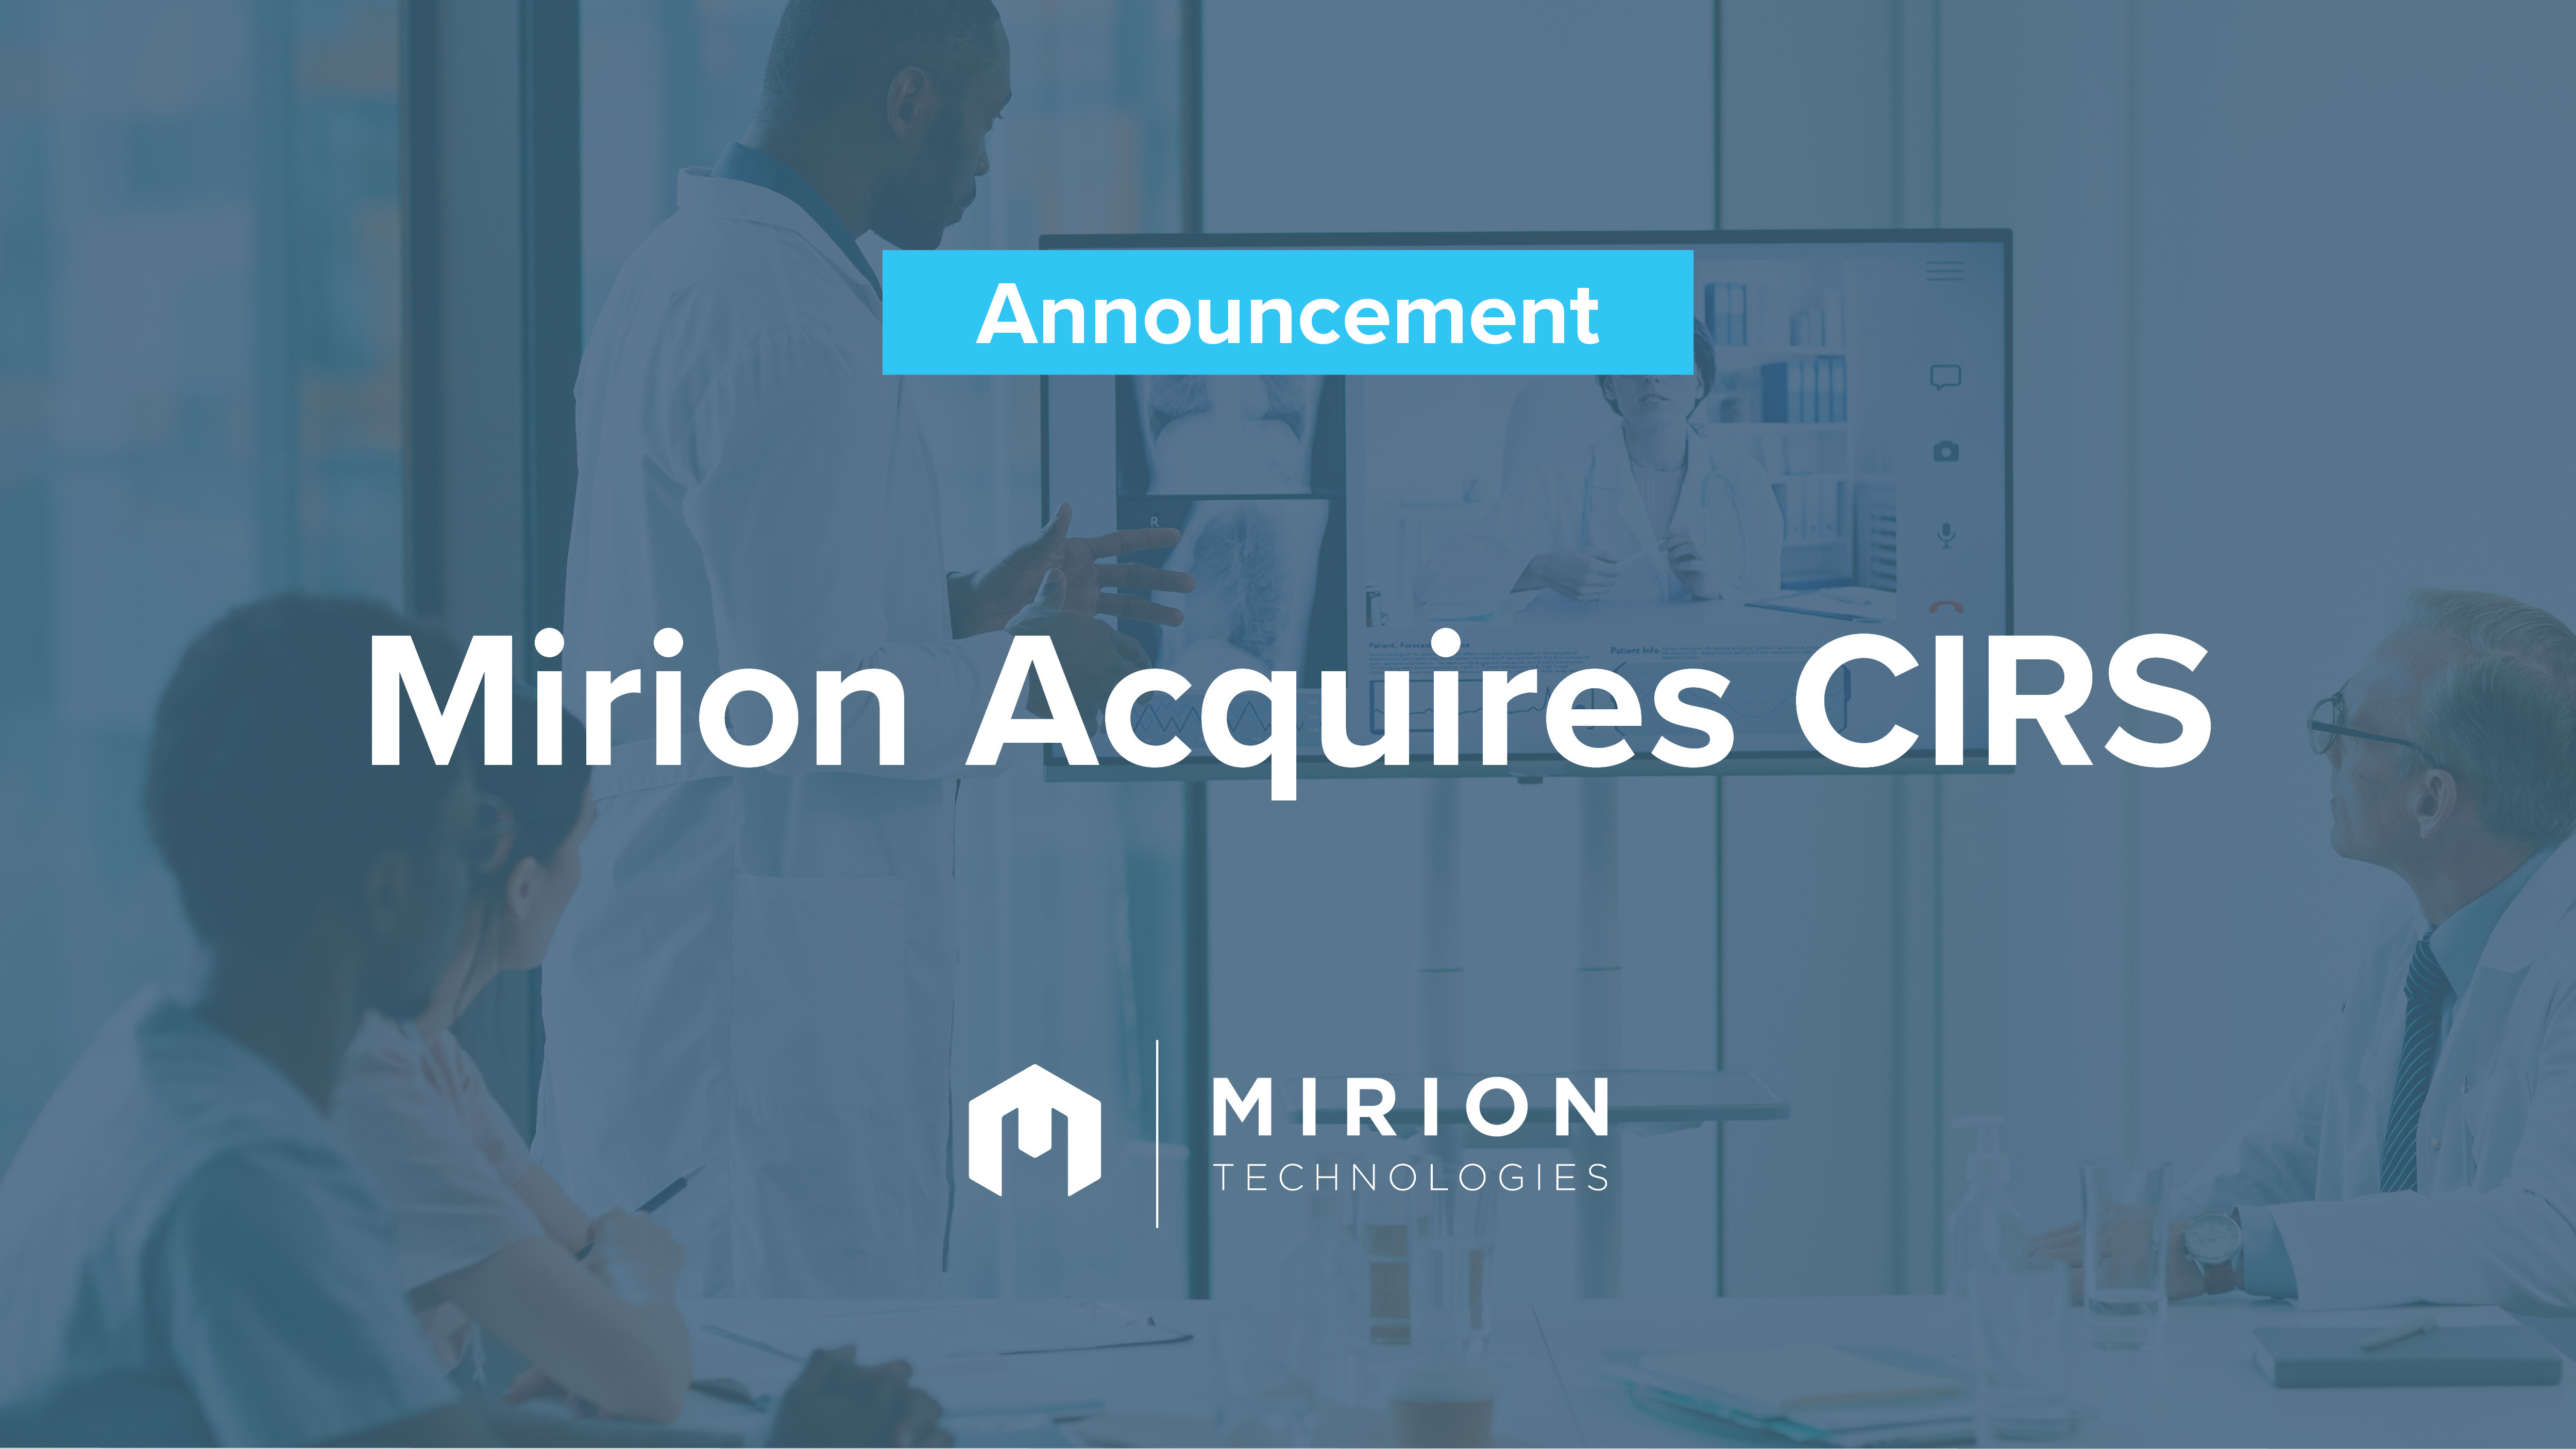 Mirion Technologies, Inc. Completes Acquisition of Computerized Imaging Reference Systems, Inc.